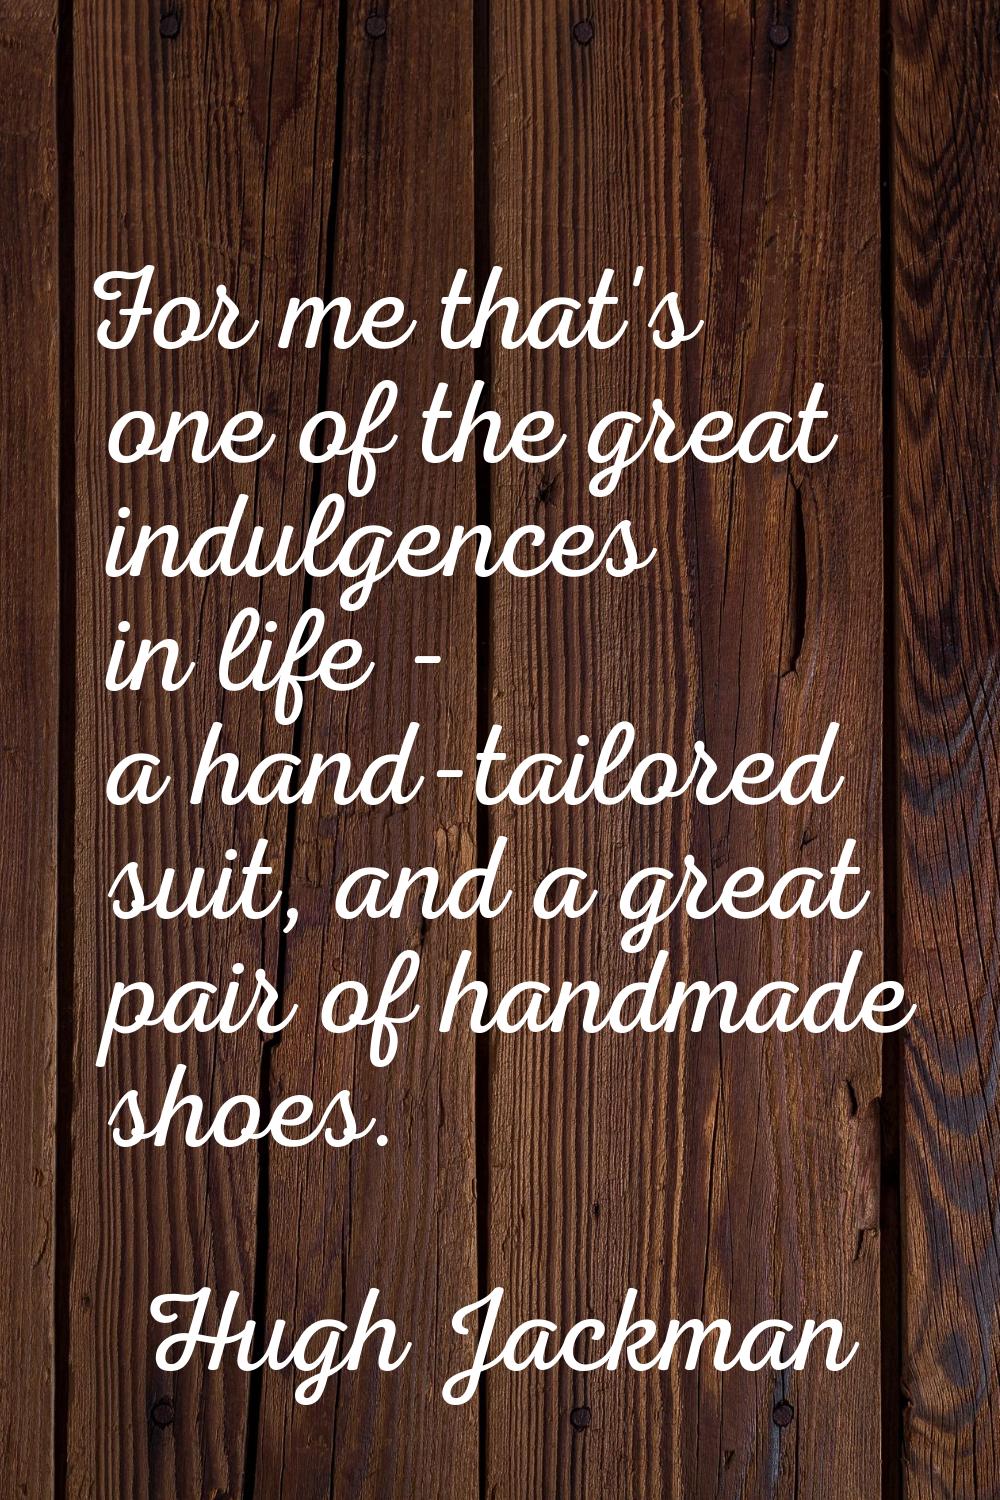 For me that's one of the great indulgences in life - a hand-tailored suit, and a great pair of hand